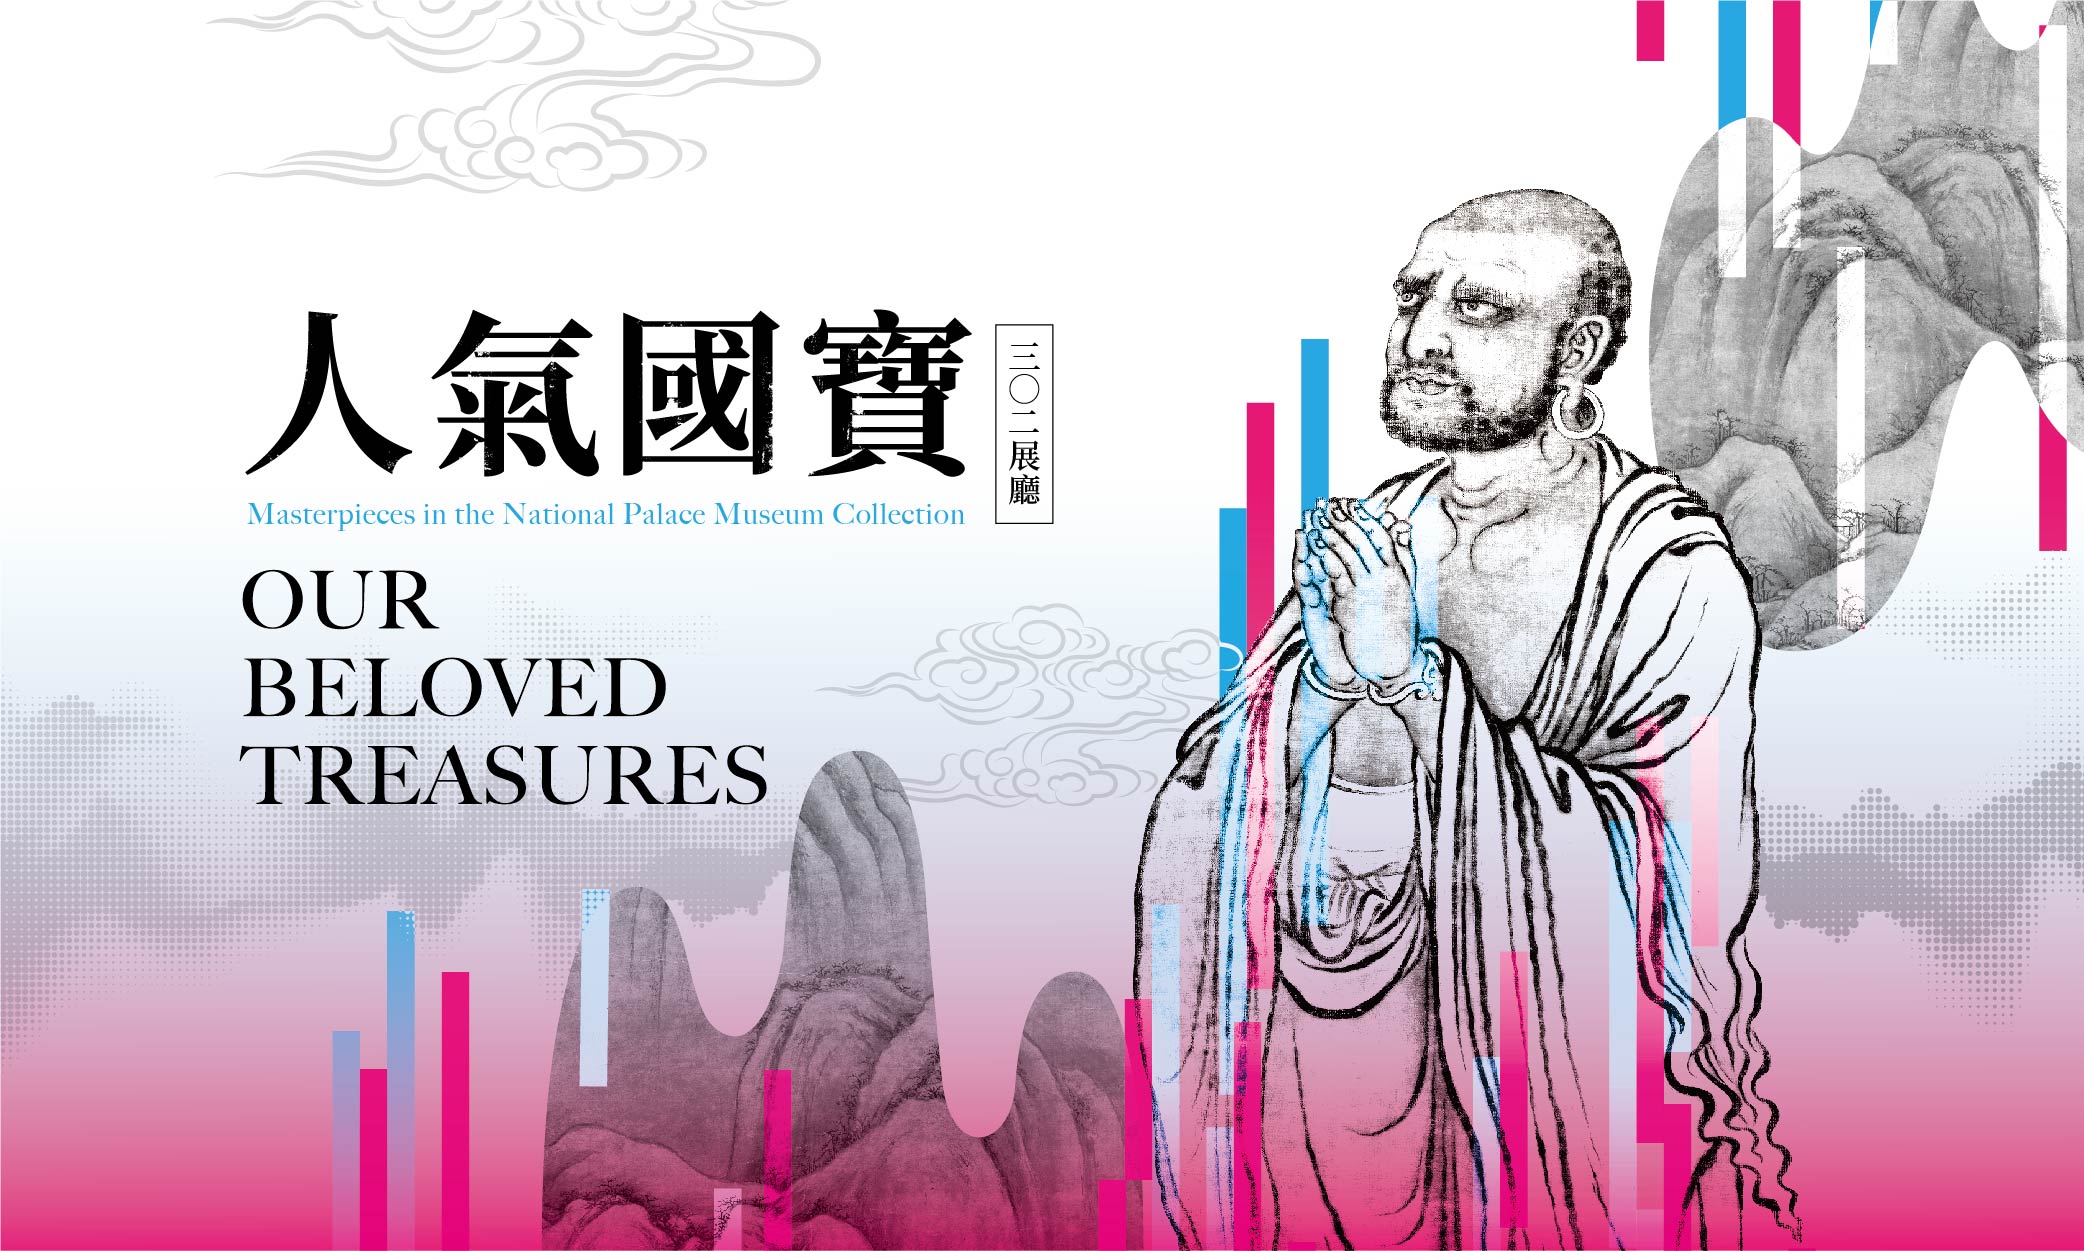 Our Beloved Treasures: Masterpieces in the National Palace Museum Collection